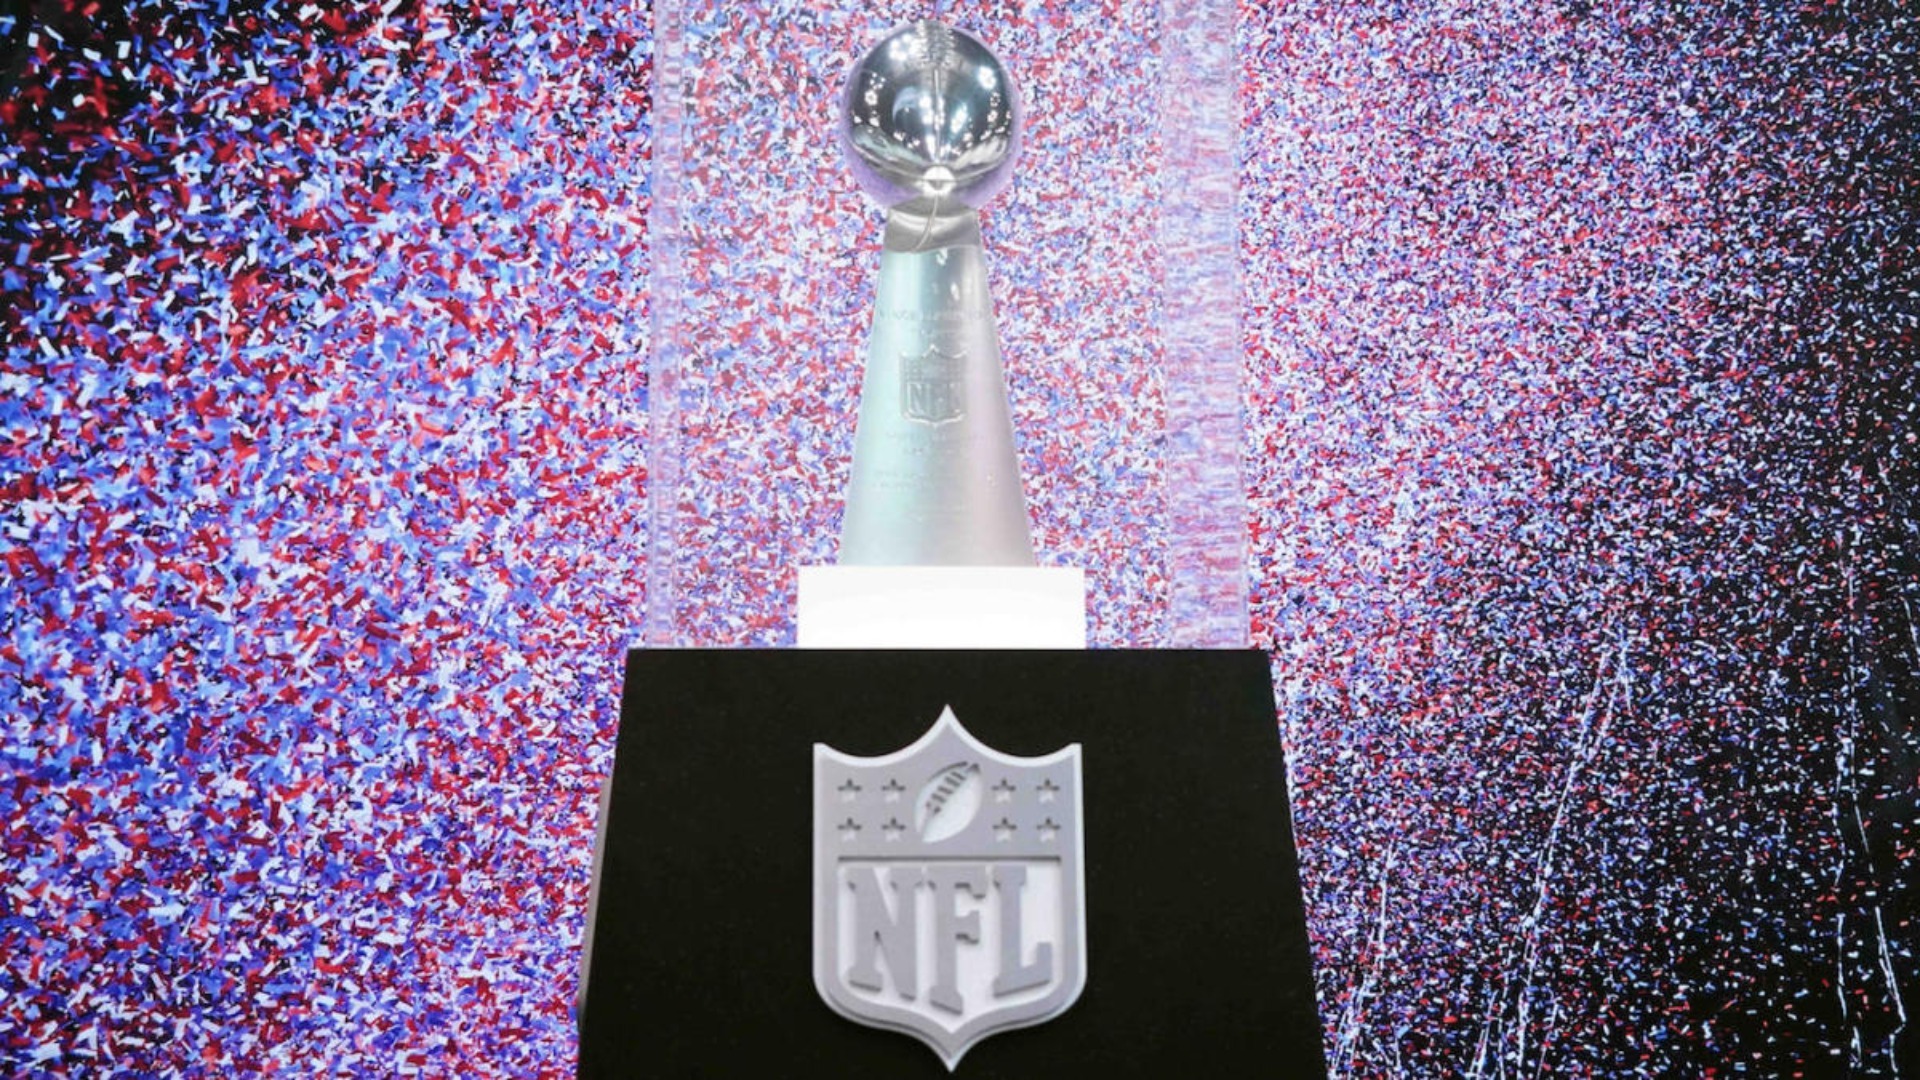 Should the Super Bowl be moved to Saturday?